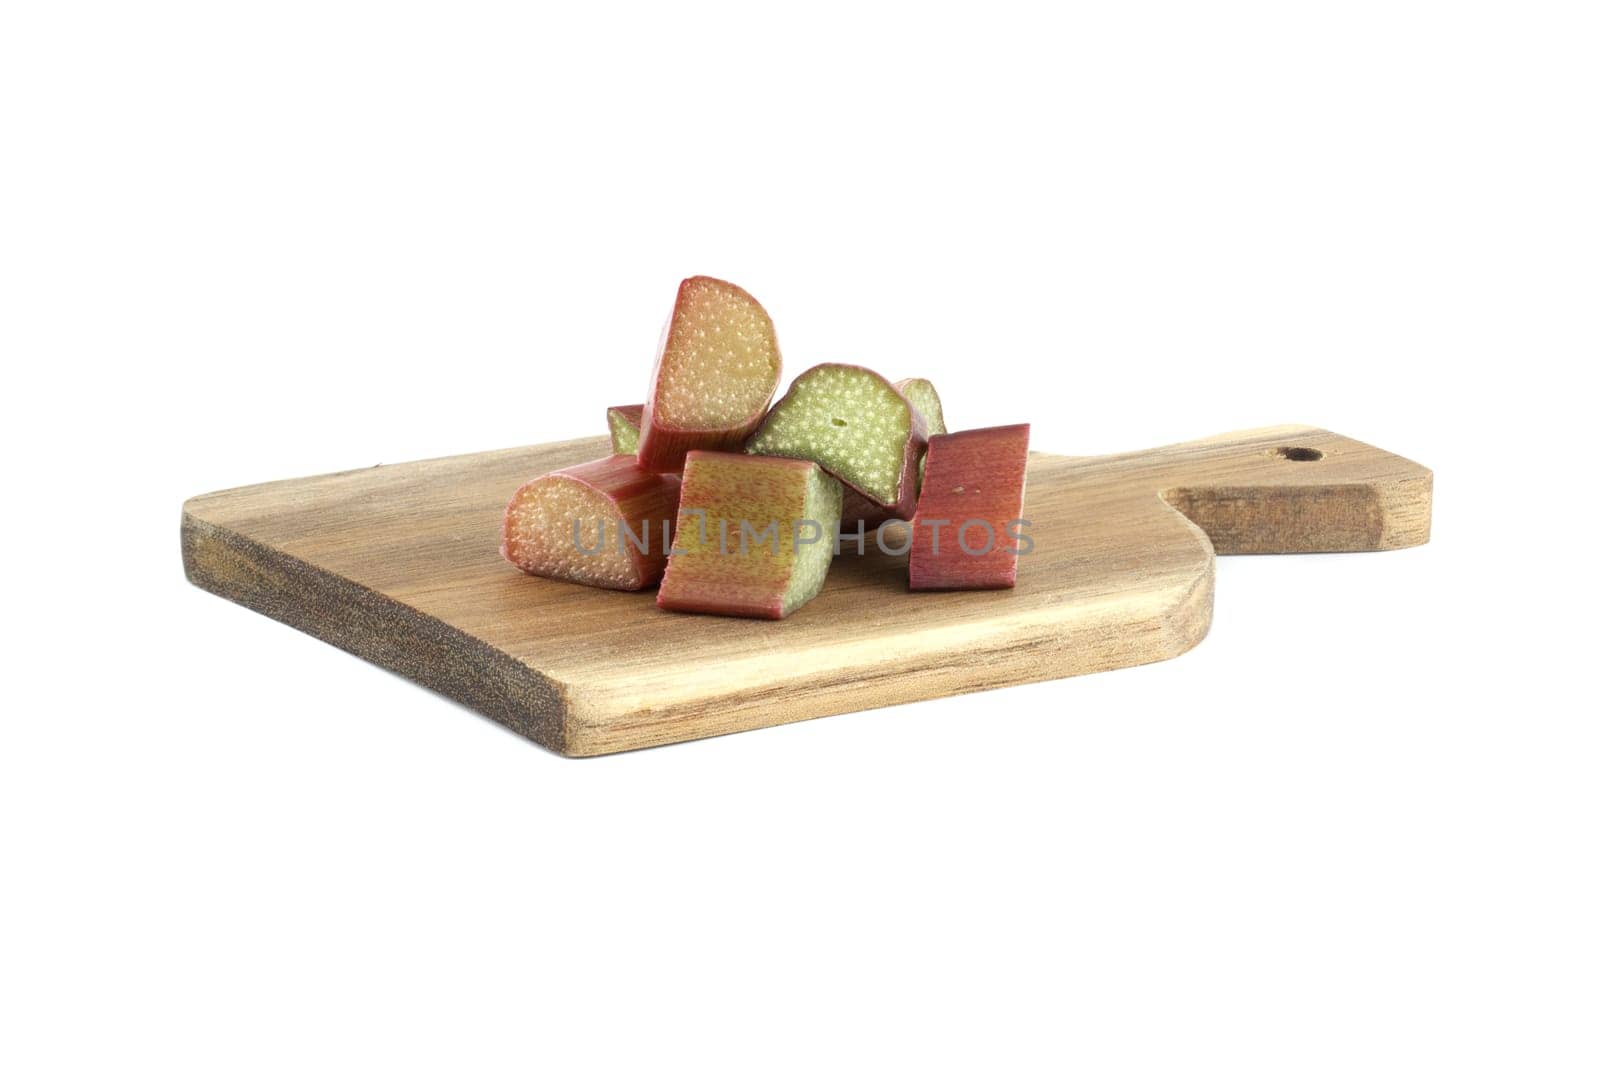 Rhubarb stalks of varying colors on wooden cutting board by NetPix